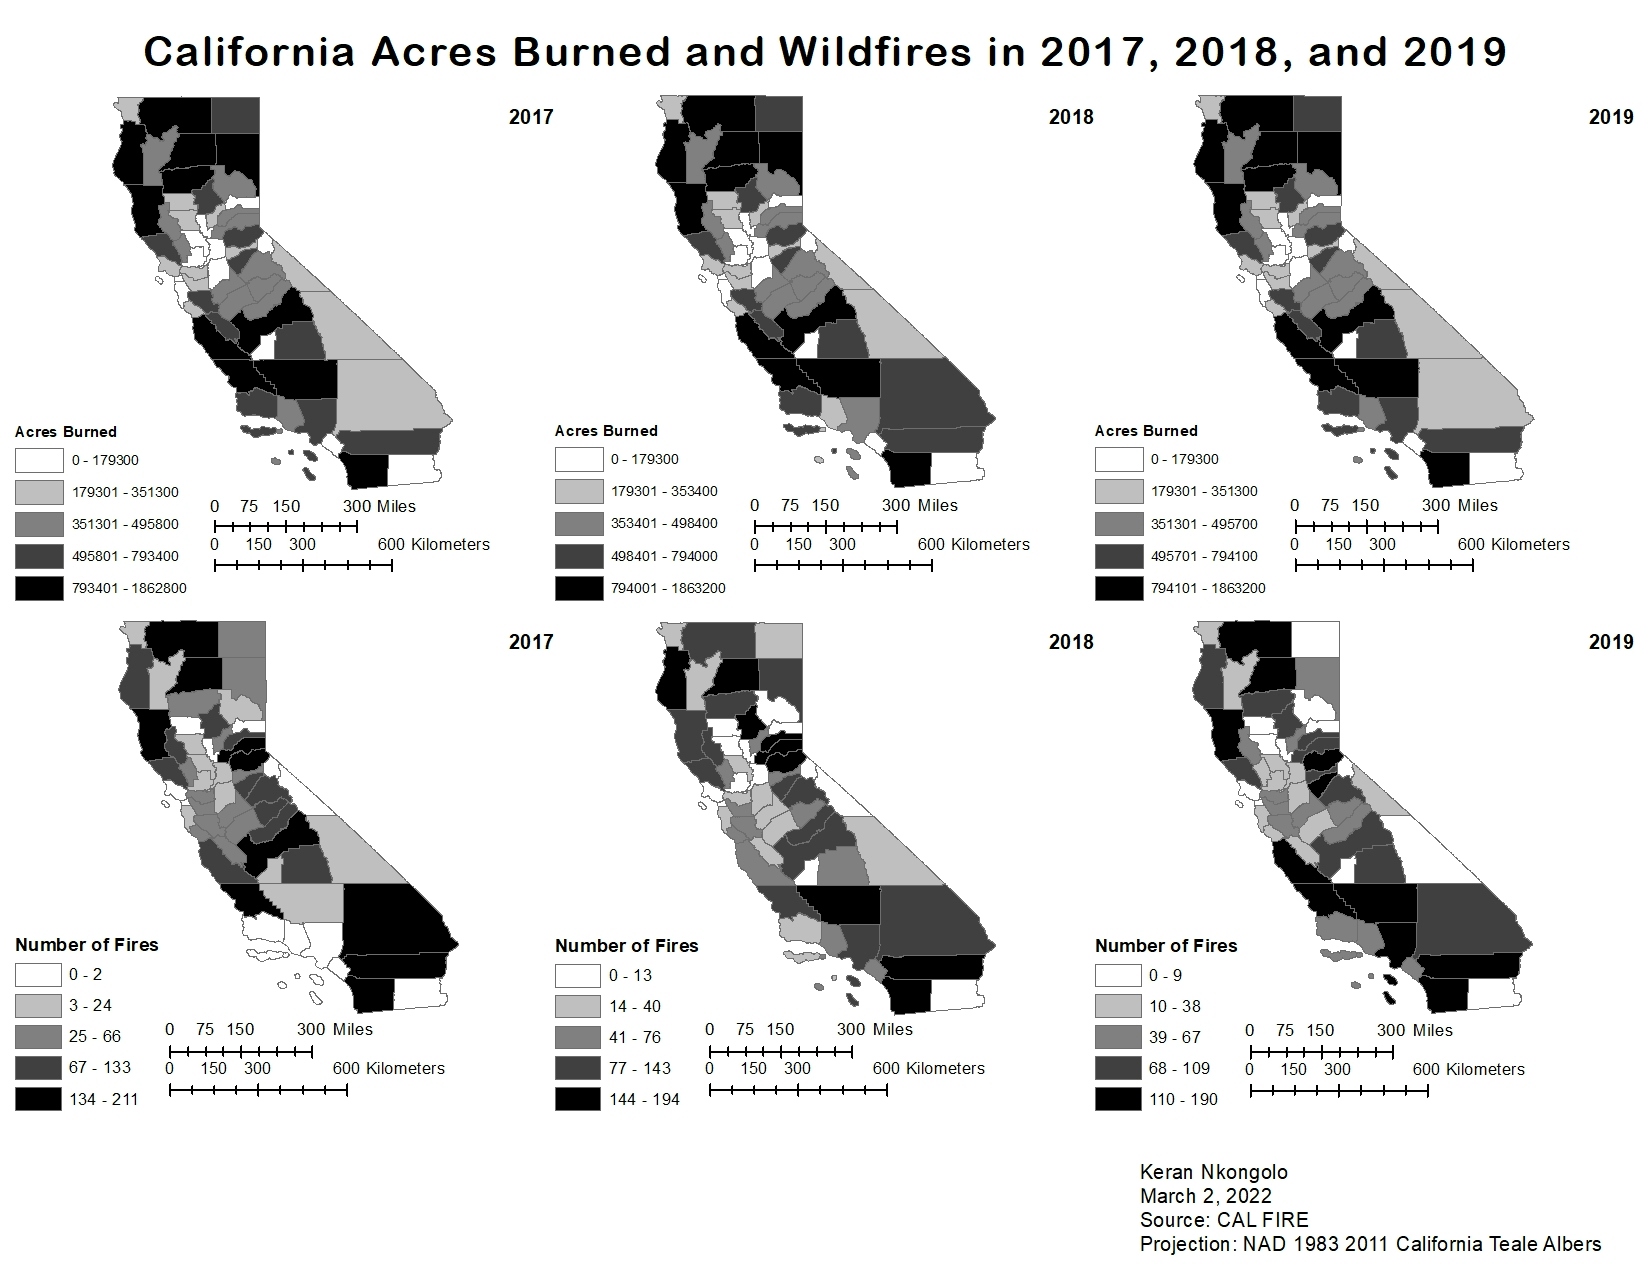 CA Acres Burned and Wildfires 